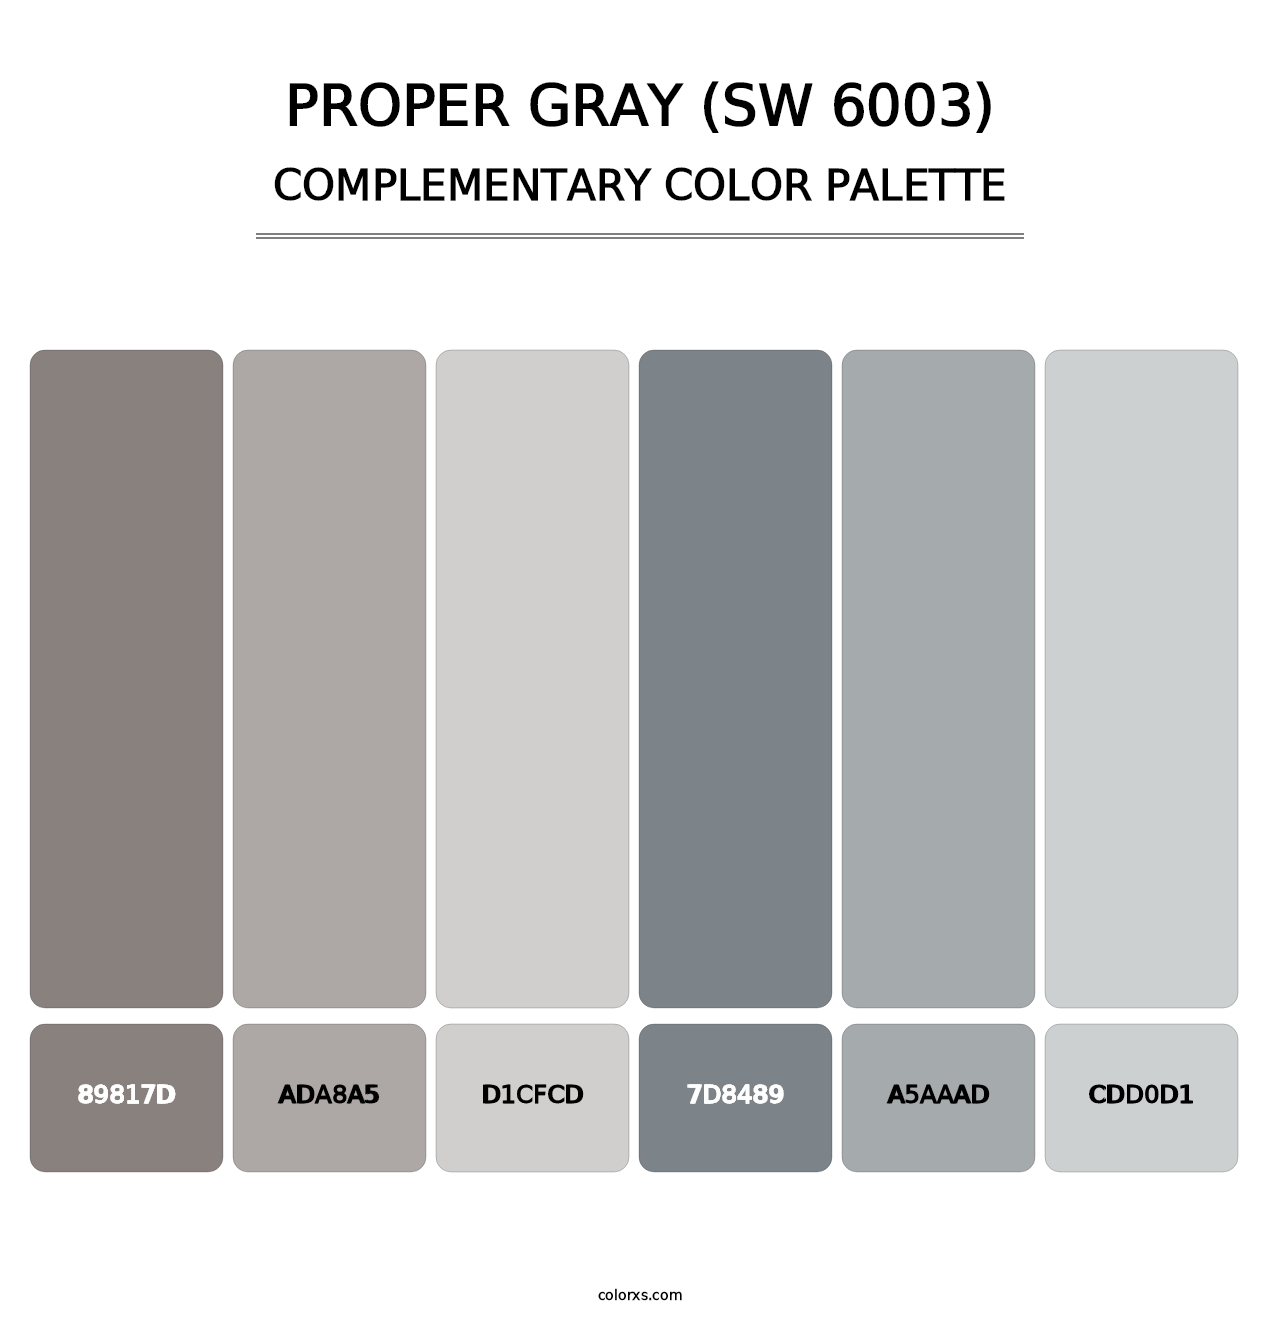 Proper Gray (SW 6003) - Complementary Color Palette